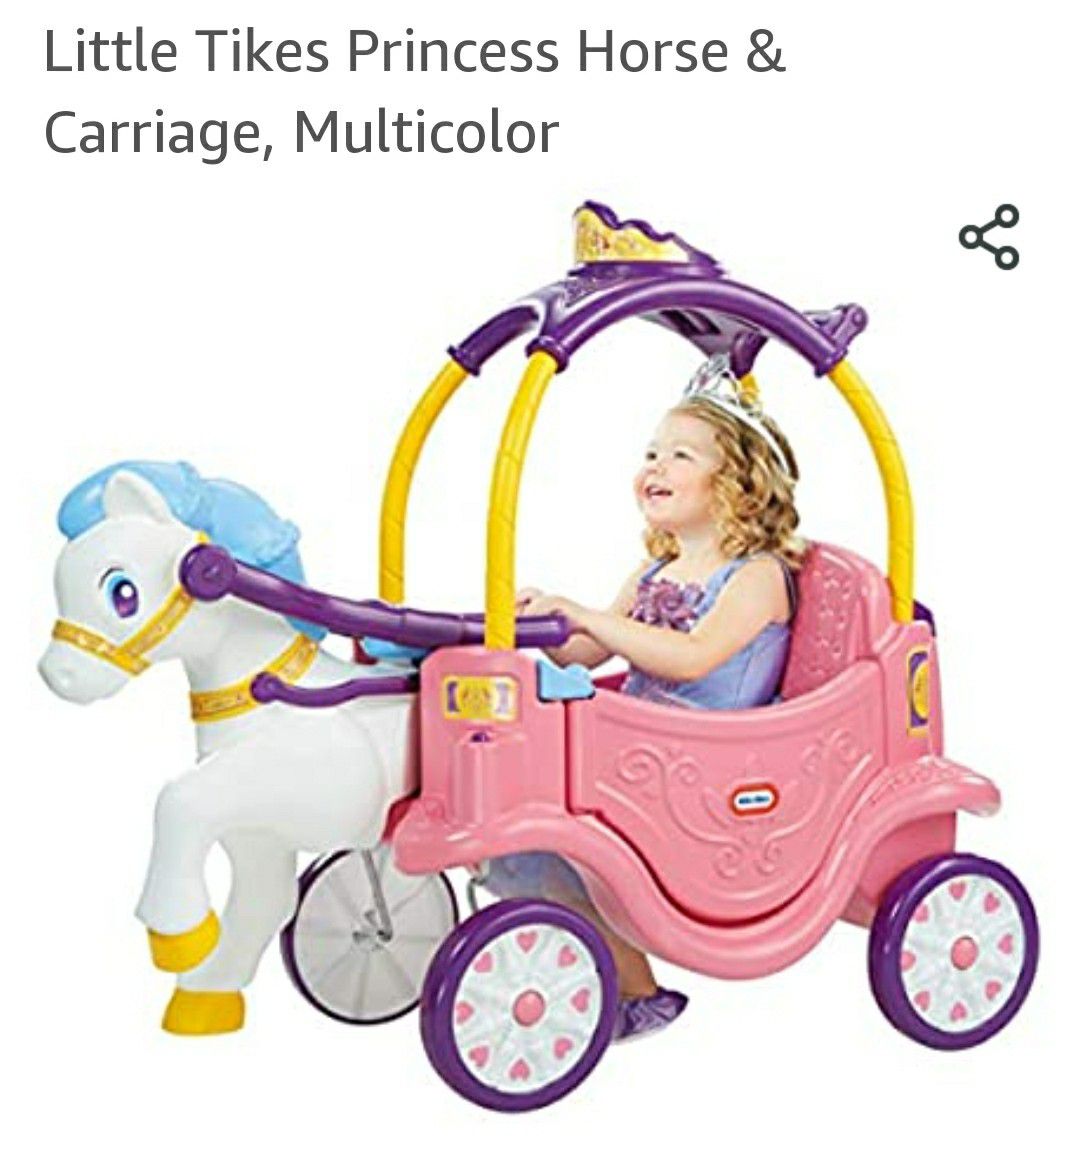 Little Tike princess horse and carriage